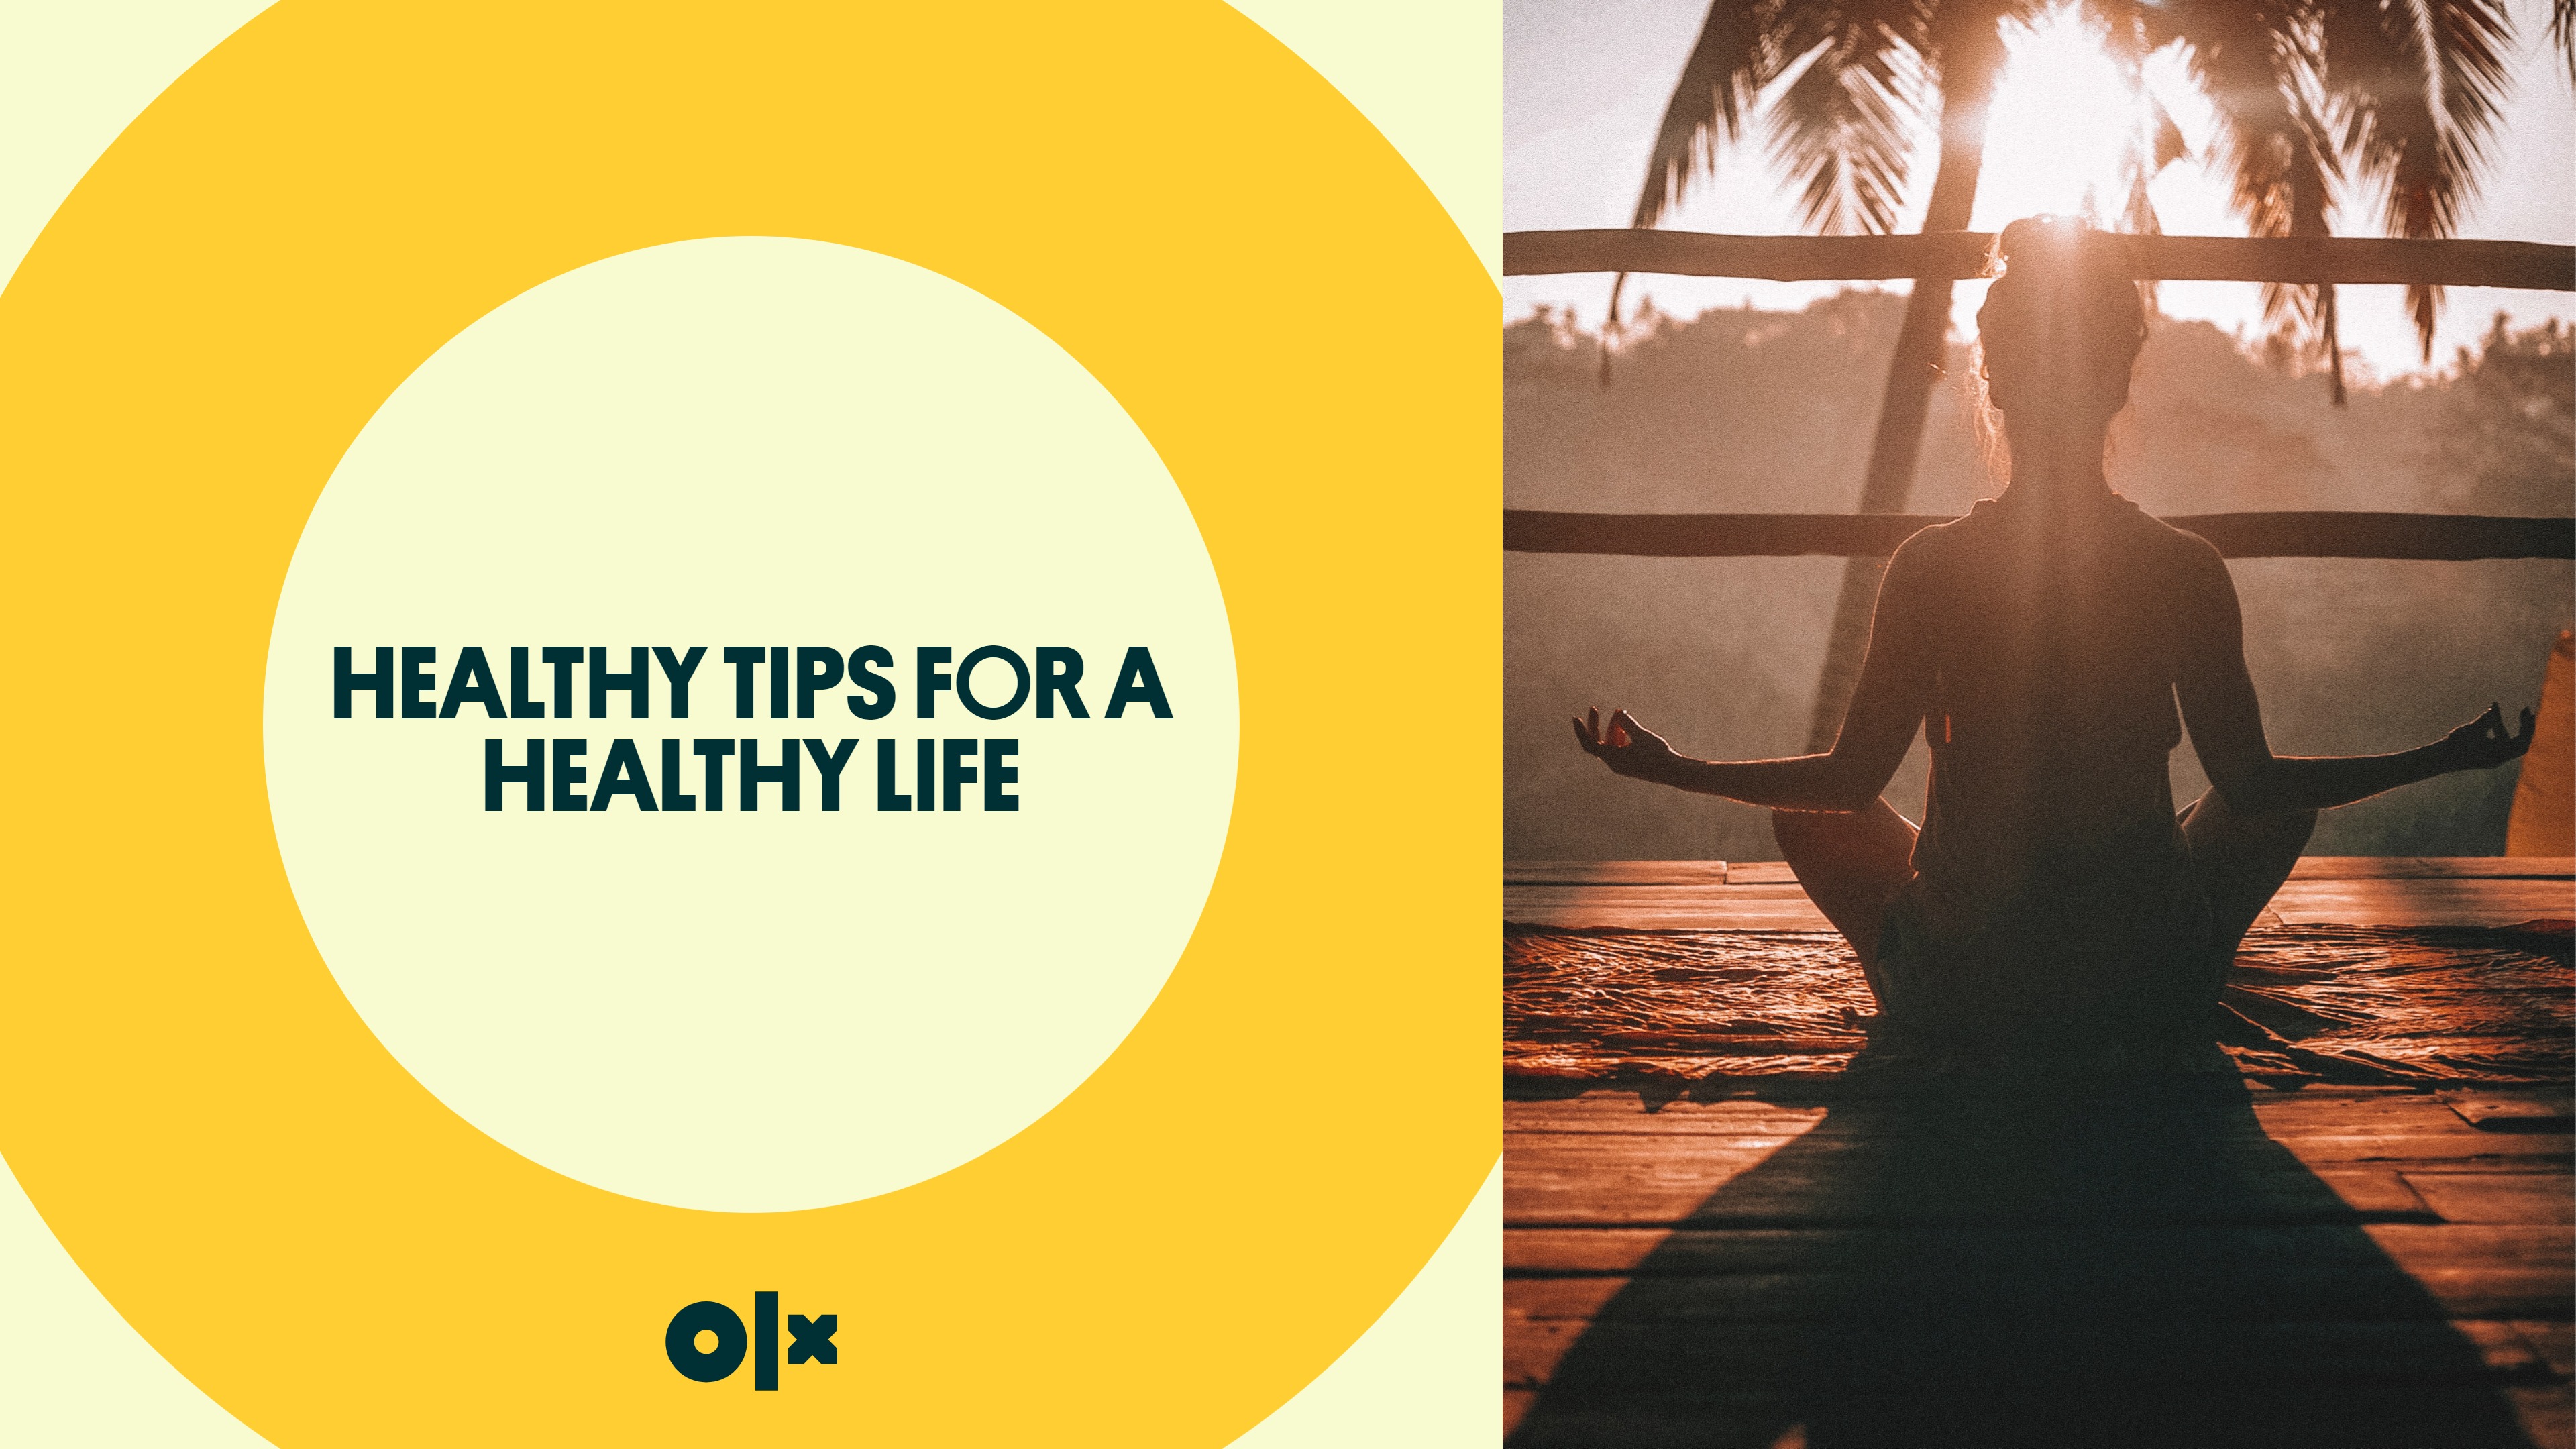 Healthy Tips for a Healthy Life